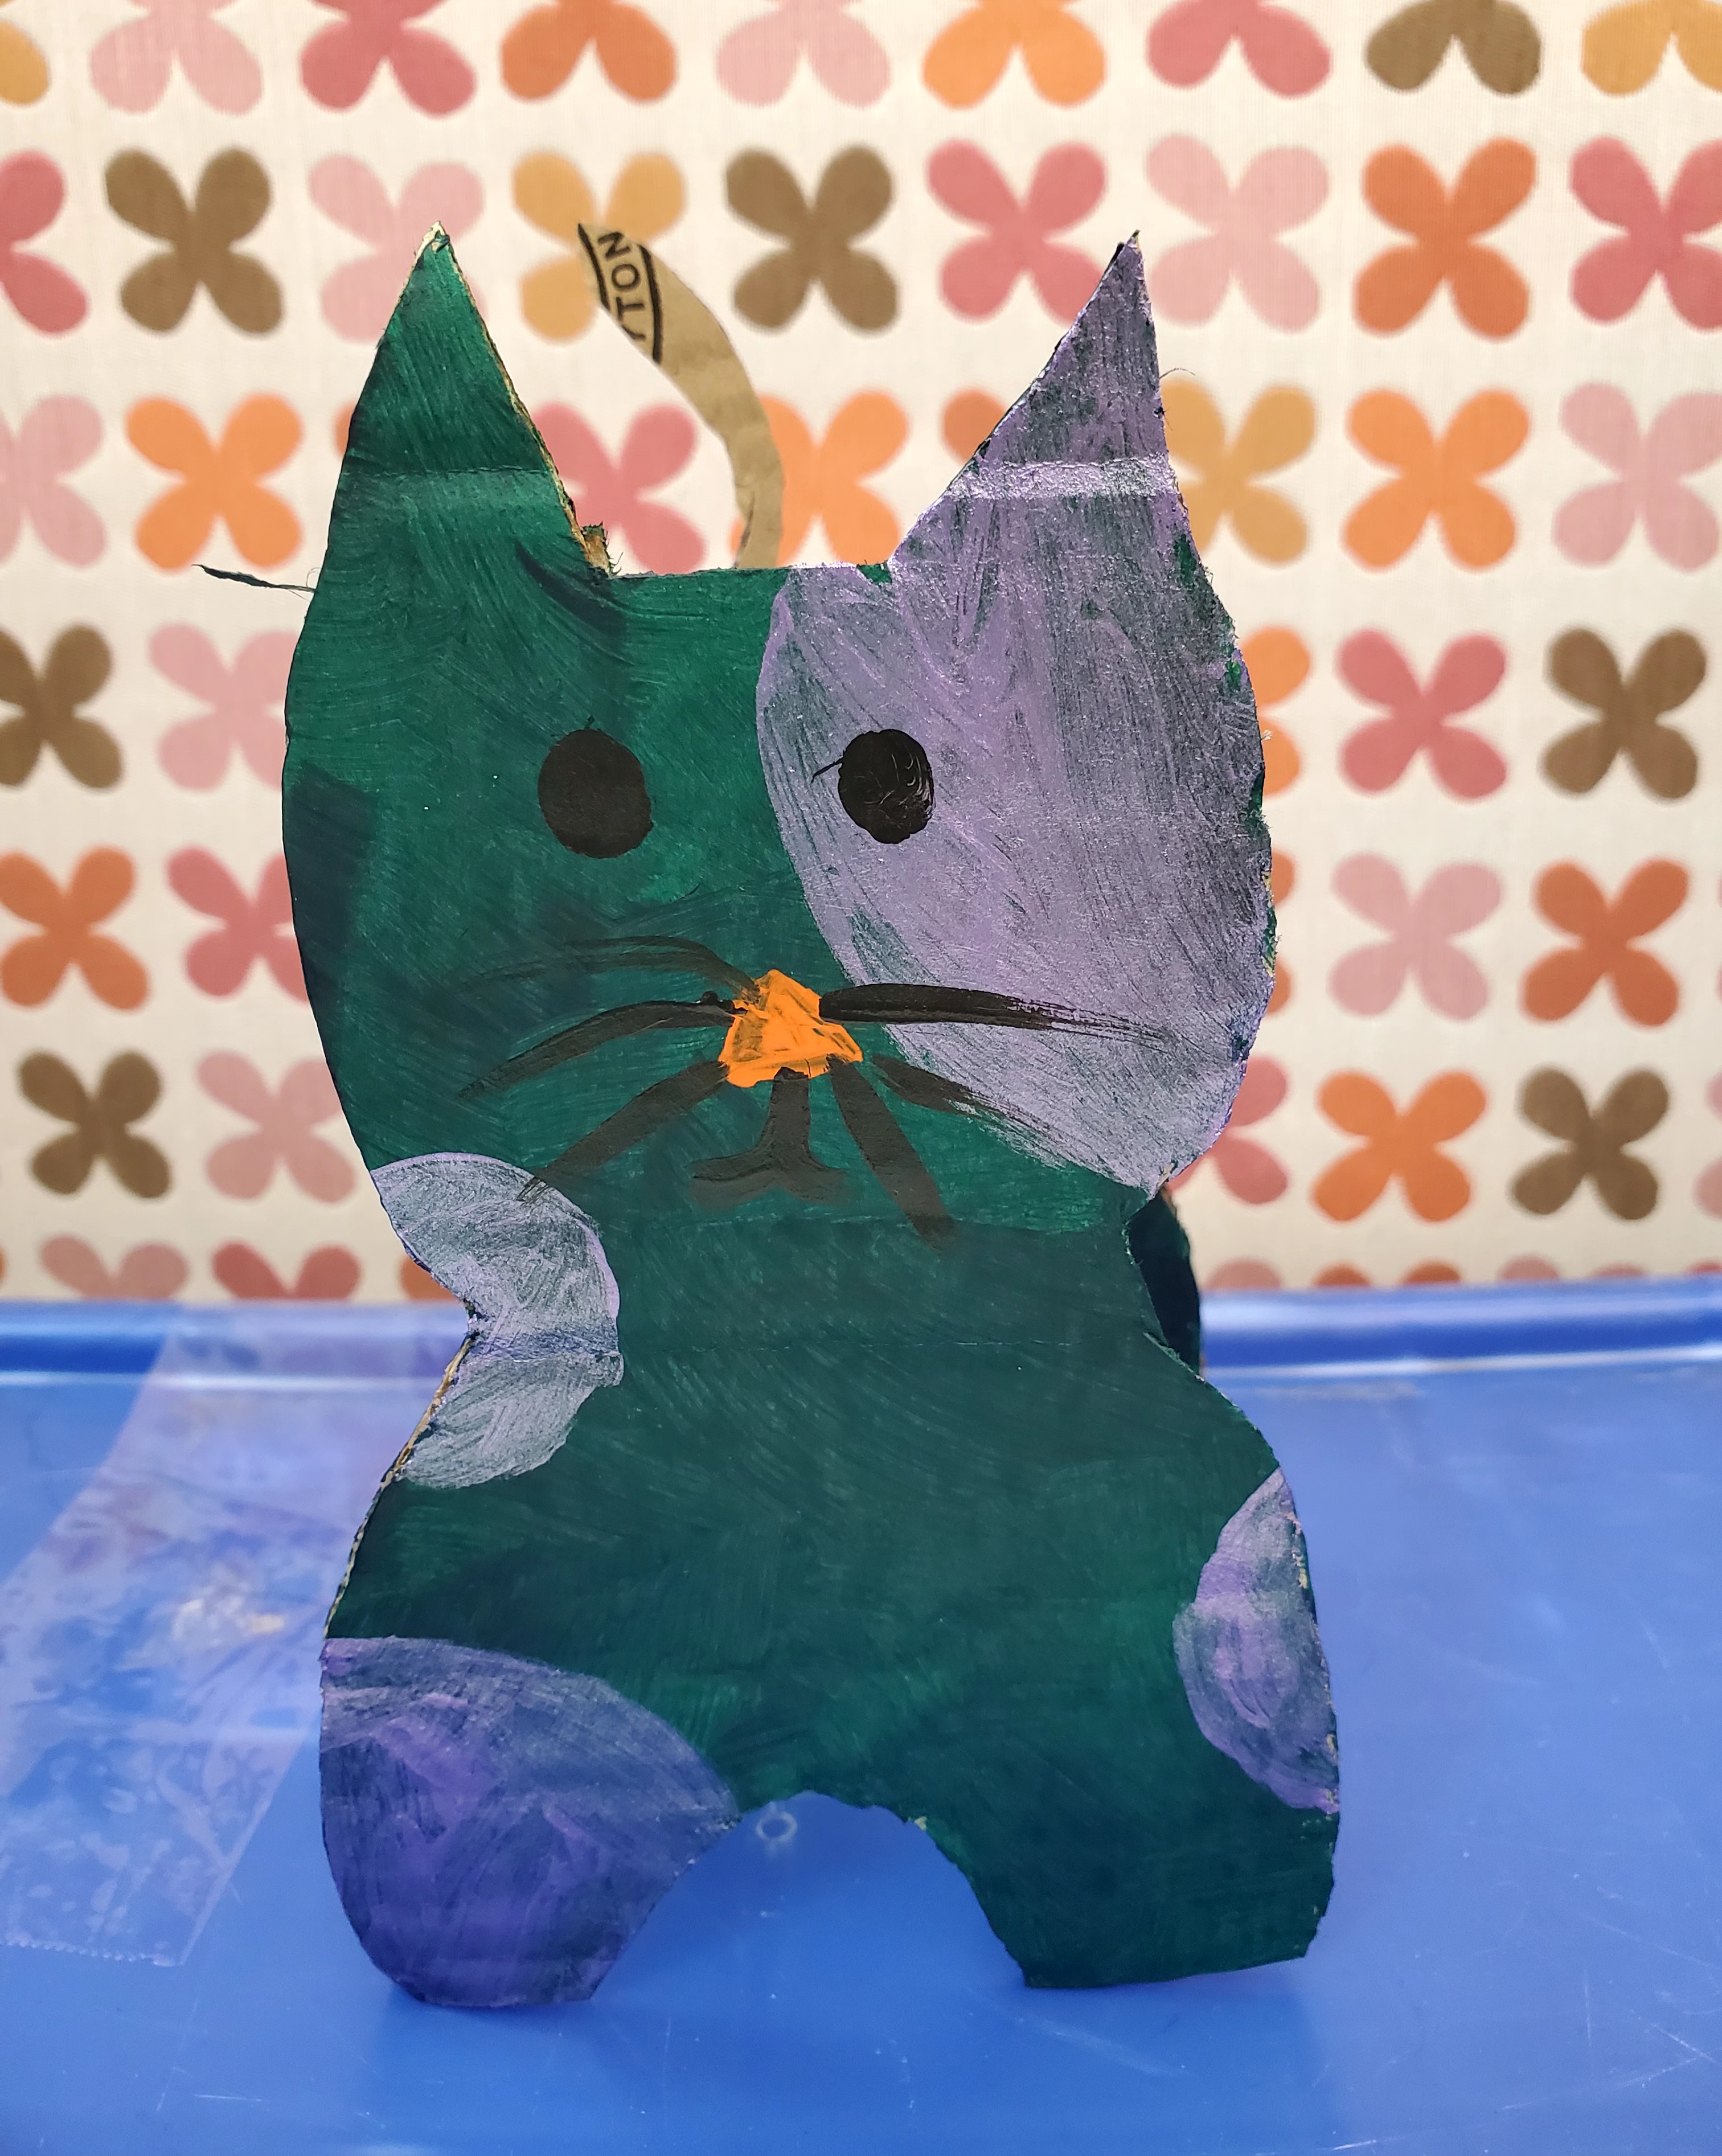 Green cardboard cat with purple splotches, orange nose, black whiskers, black eyes, sitting on top of a blue box with a background of flowers in shades of orange, pink, brown, and yellow